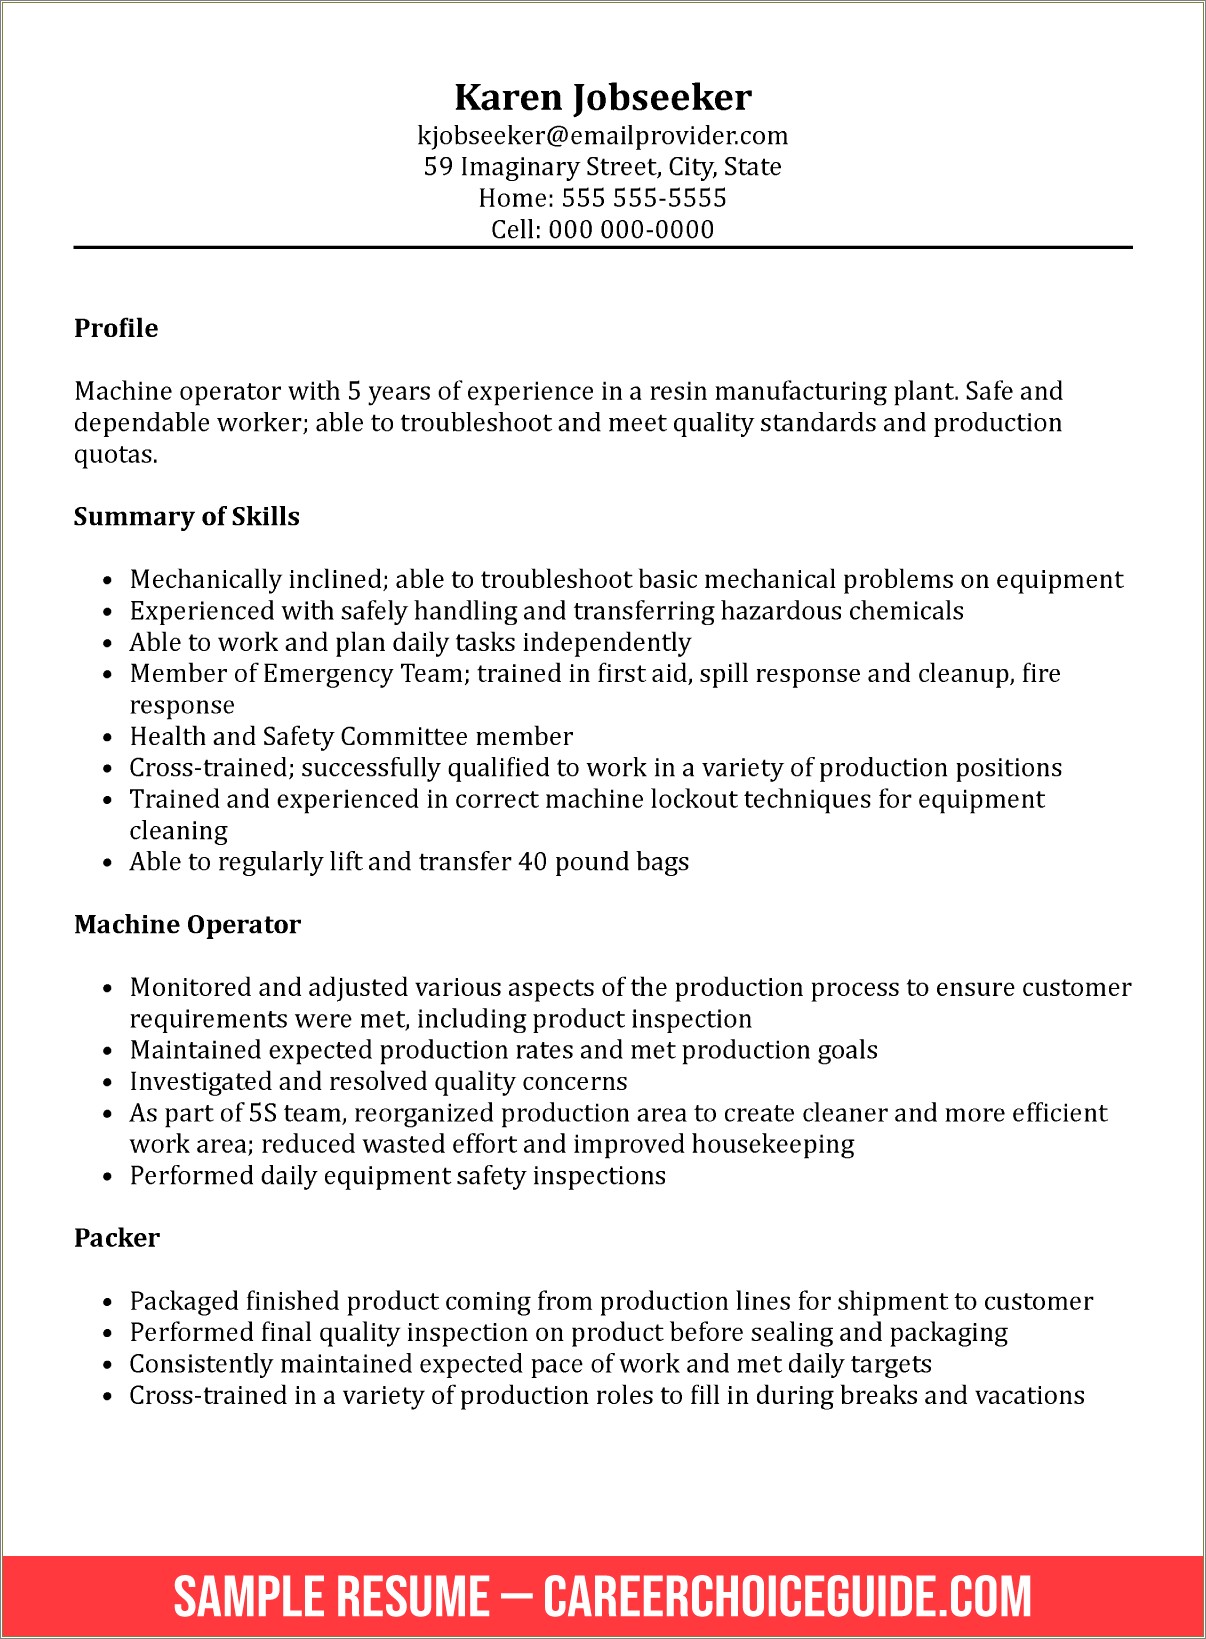 Functional Resume Examples For I T Professionals